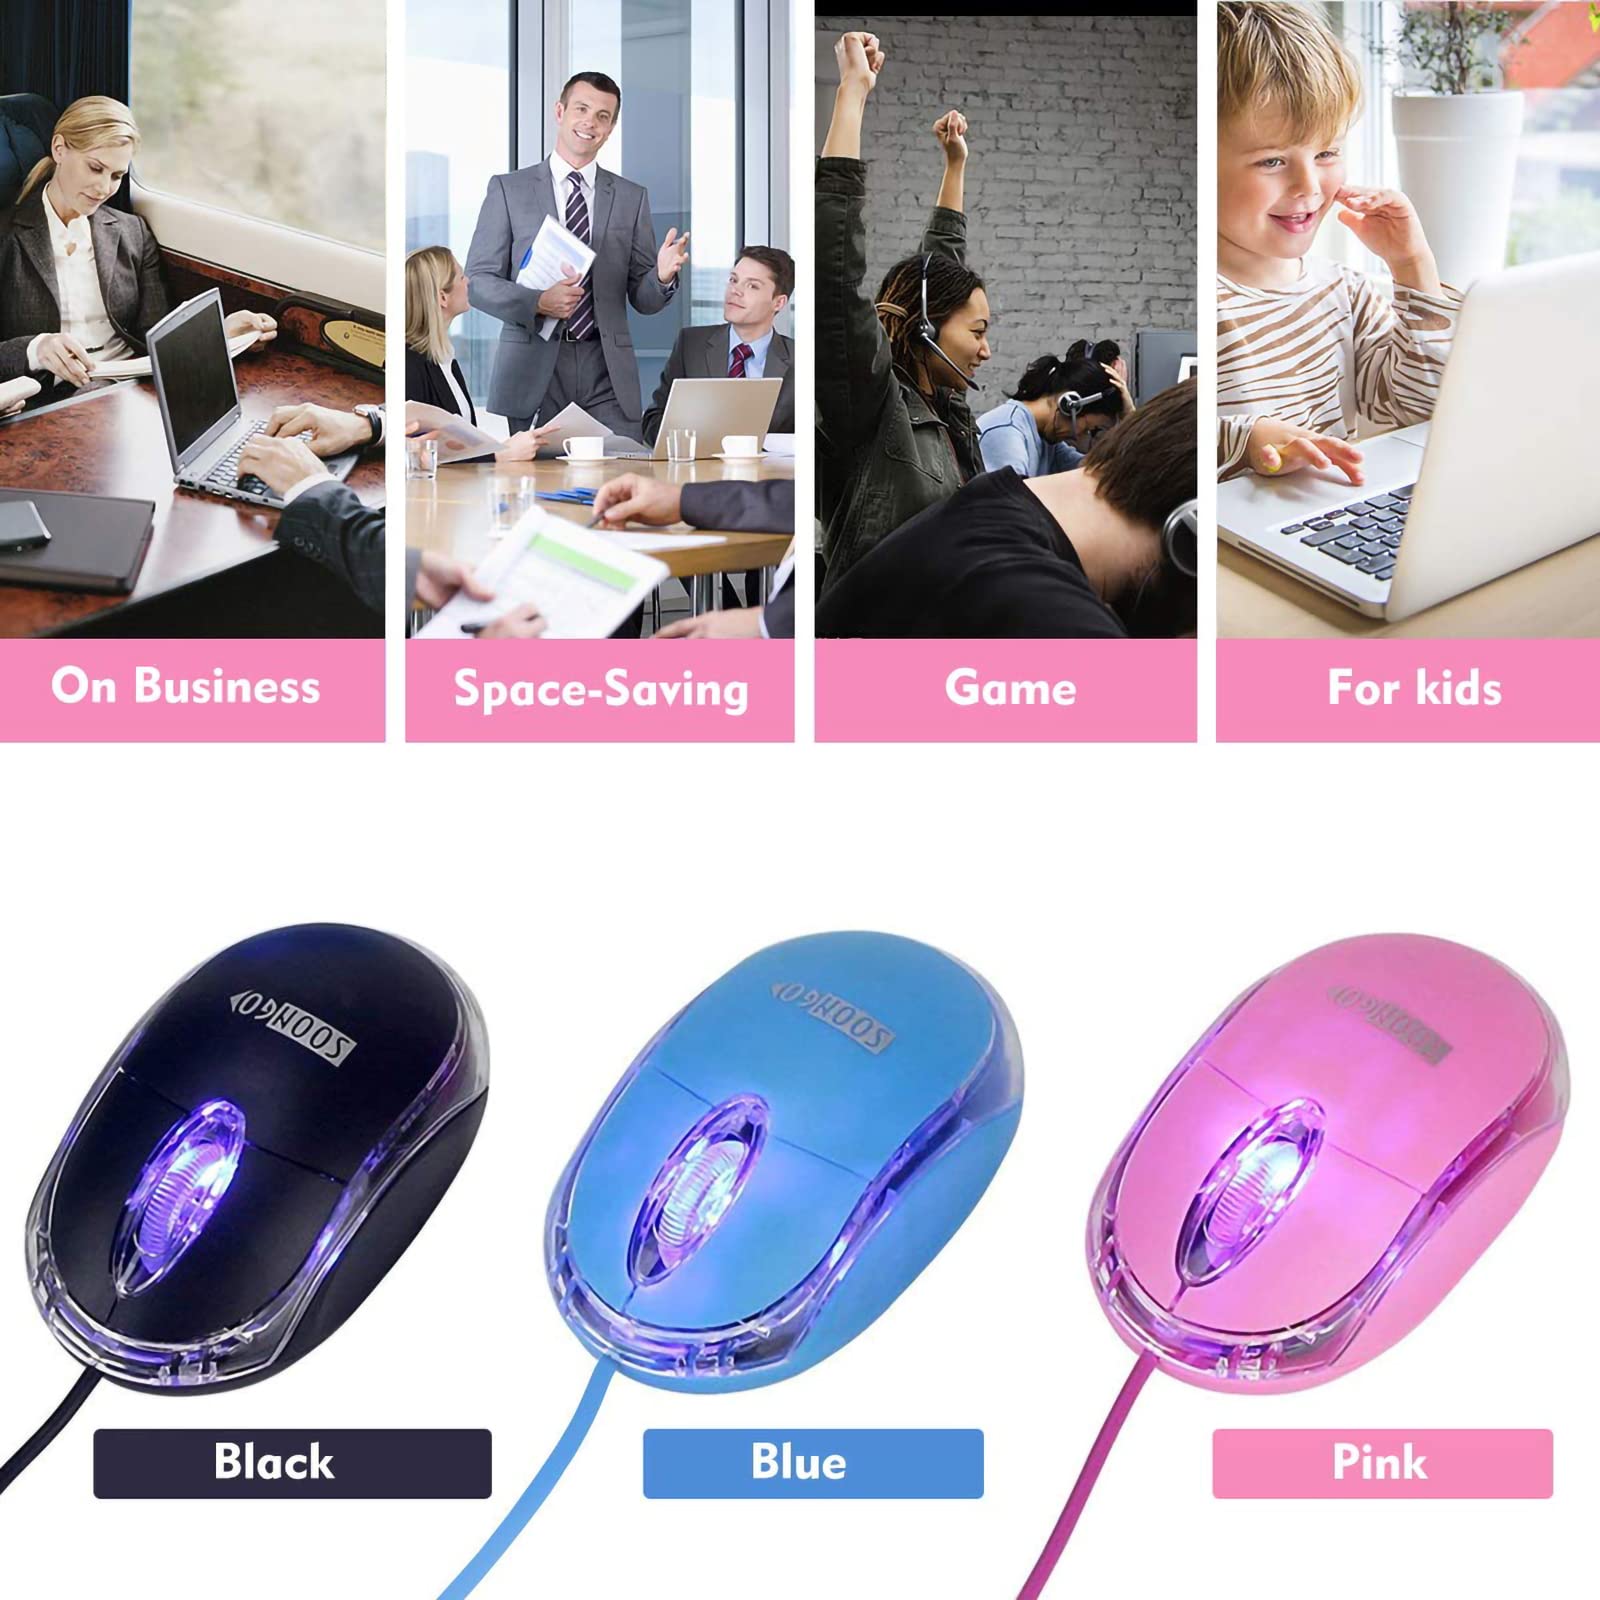 Pink Mini Mouse Computer Mouse Ergonomic Mouse with 1.5M Cable USB Mouse for Laptop PC Desktop mice Compatible with Windows Linux Mac fit for Office Business Home Kids and Lady by SOONGO